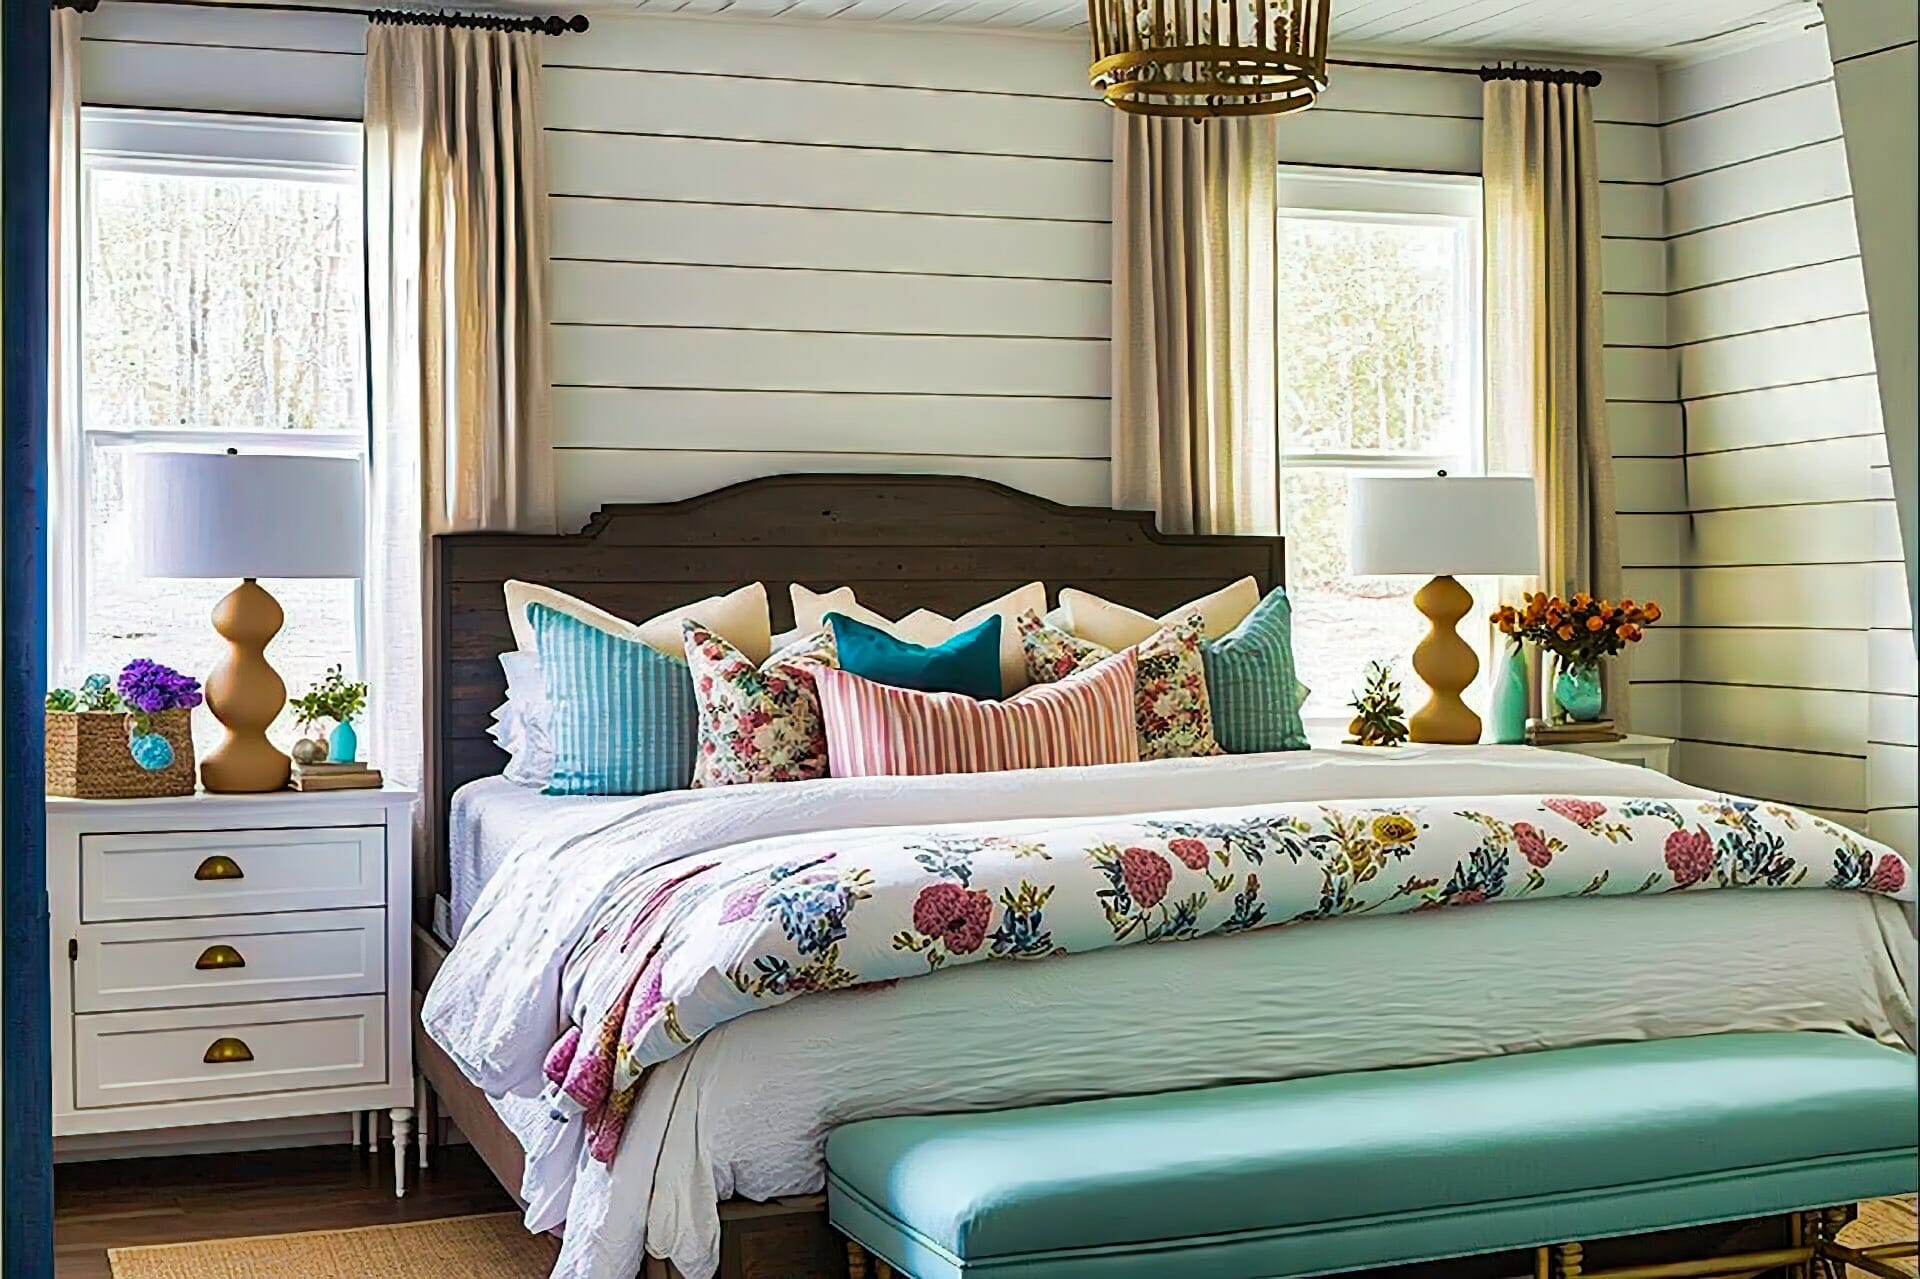 Cottage Style Bedroom With Shiplap Walls And A Rustic Wood Plank Ceiling. A Plush King Size Bed With A Distressed White Headboard Is The Centerpiece Of The Room, And A Collection Of Colorful Throw Pillows Add A Playful Touch. A Pair Of Matching White Nightstands With Brass Lamps Flank The Bed, And A Wooden Bench At The Foot Of The Bed Provides Additional Seating. A Woven Area Rug In Neutral Tones Anchors The Space, And A Vintage Ladder Serves As A Unique Bookshelf. A Set Of French Doors Lead Out To A Balcony Overlooking The Garden.